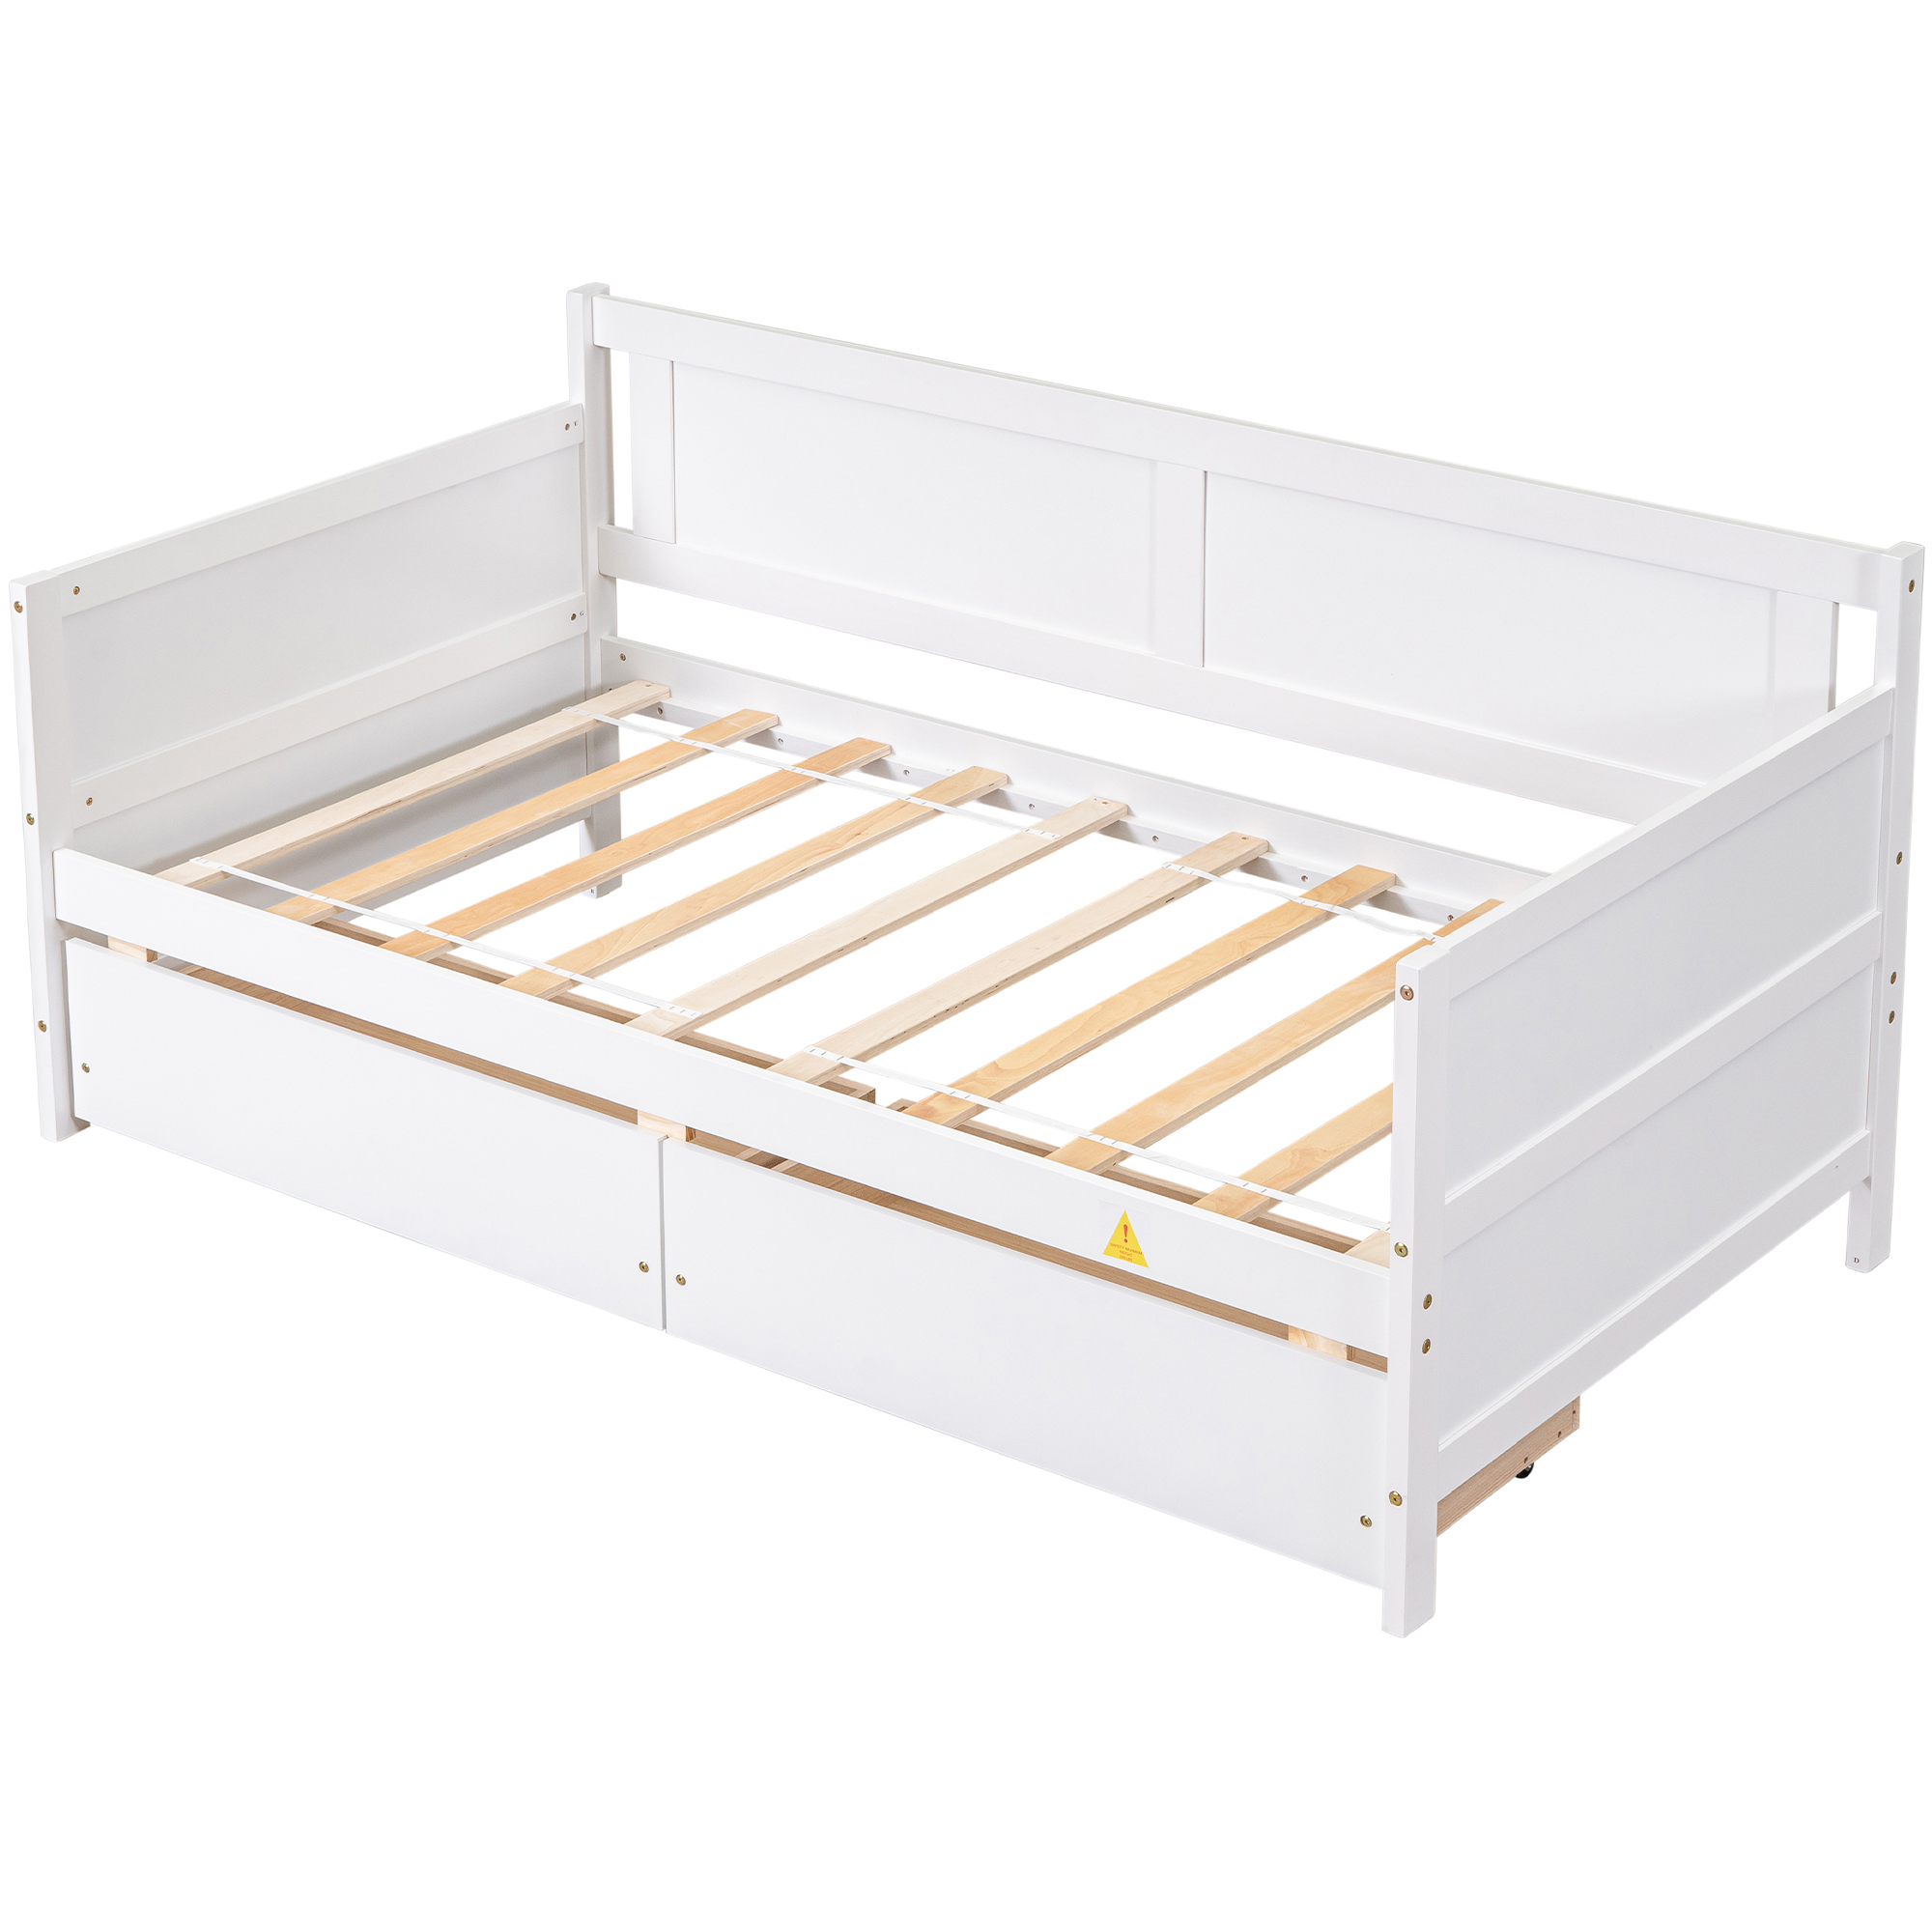 uhomepro White Daybed with Storage Drawers, Wood Twin Bed Frame Sofa Bed for Kids Girls Boys, Living Room Bedroom Furniture, No Box Spring Needed - image 5 of 11